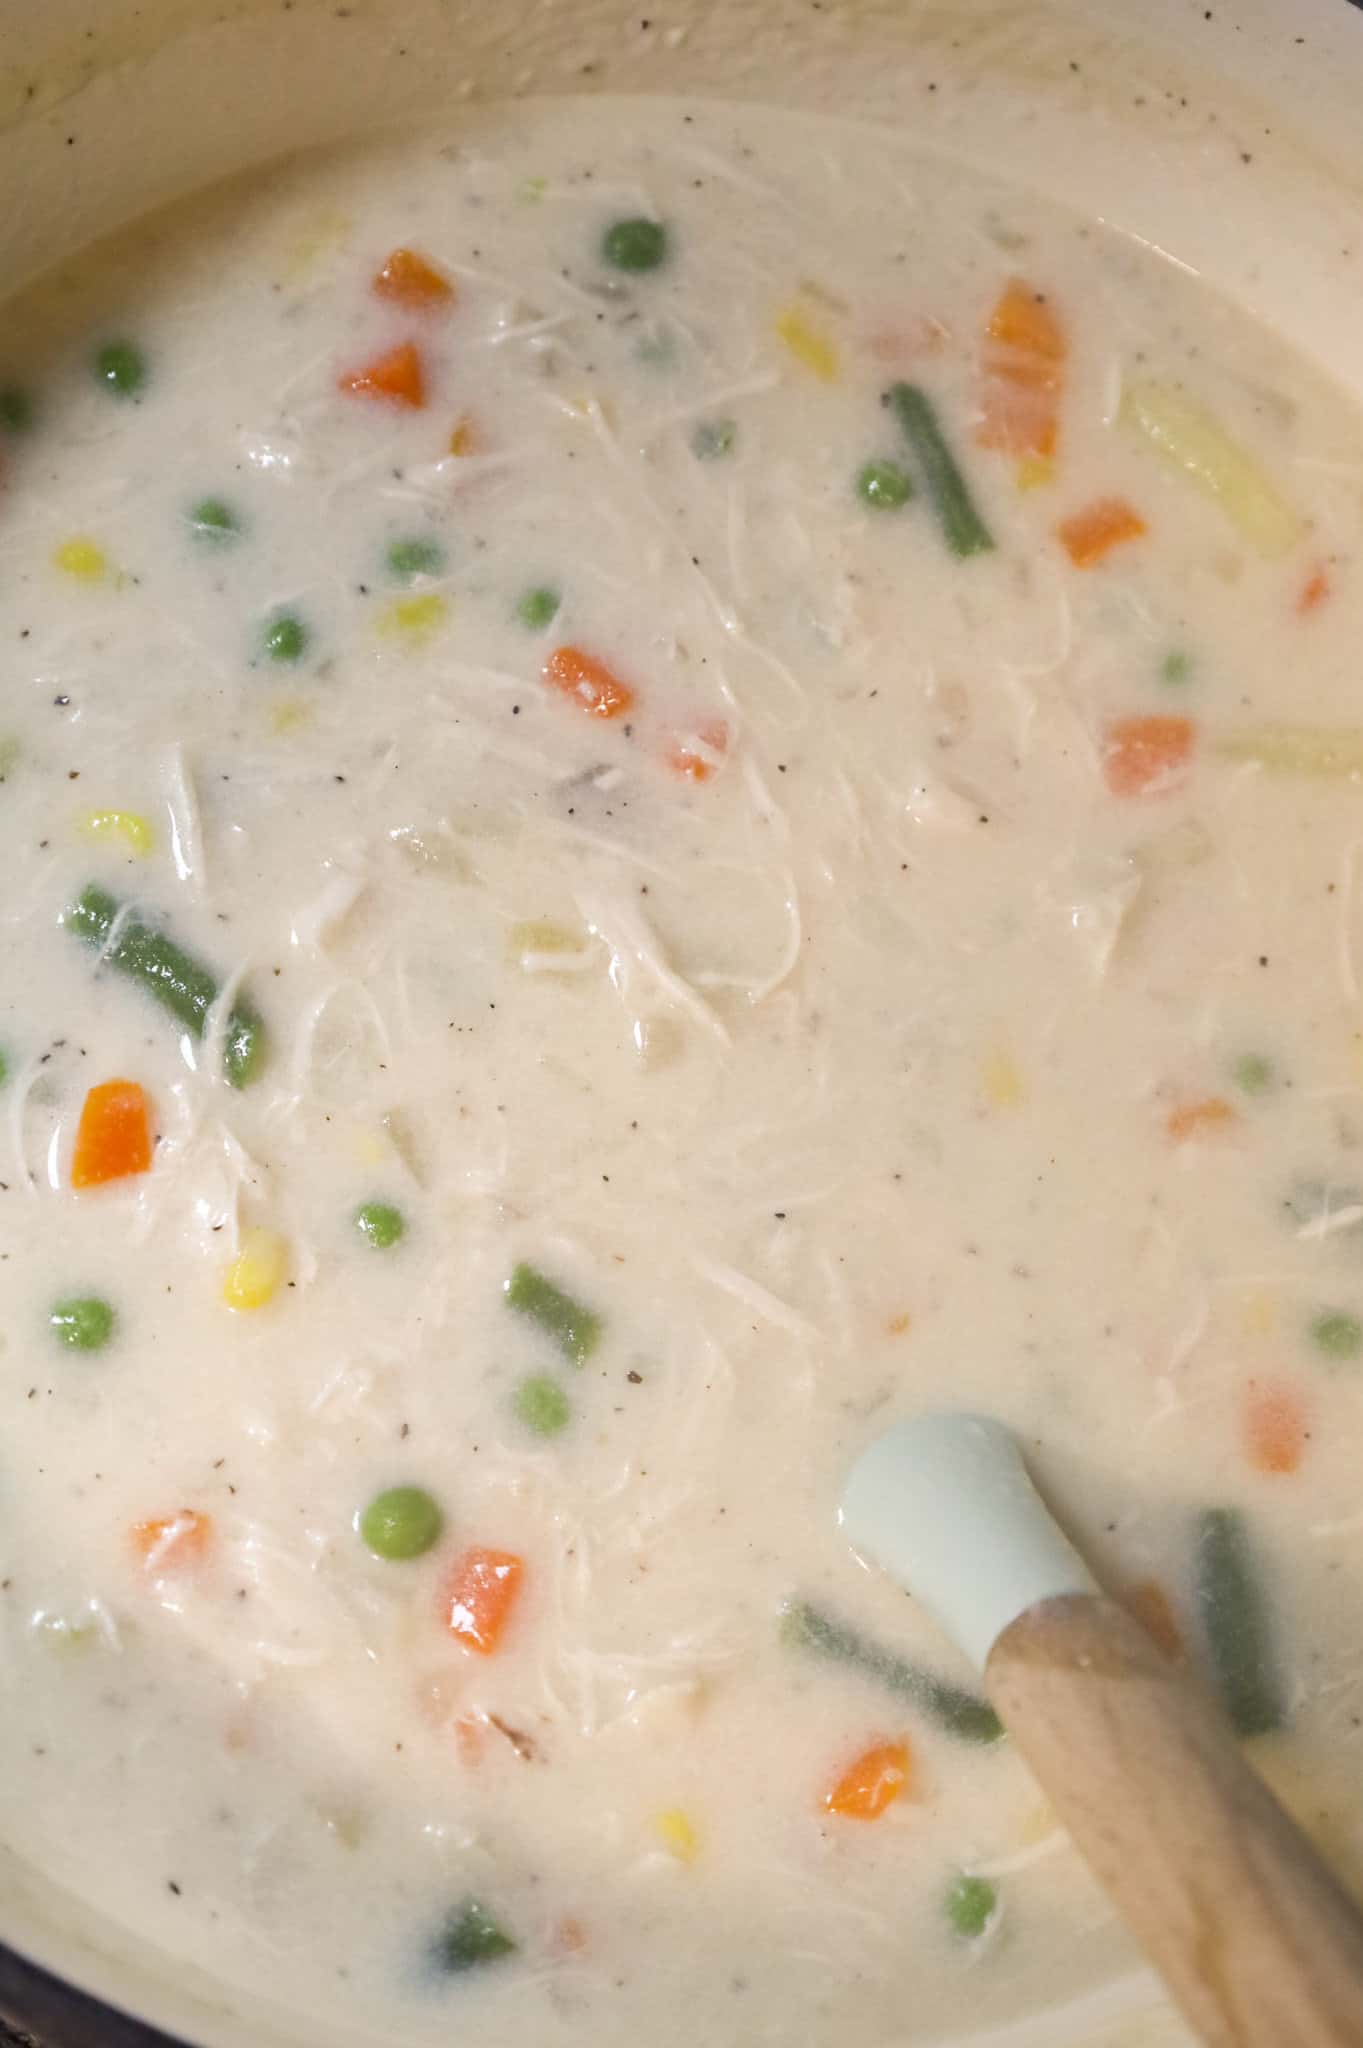 stirring vegetables and shredded chicken into cream soup